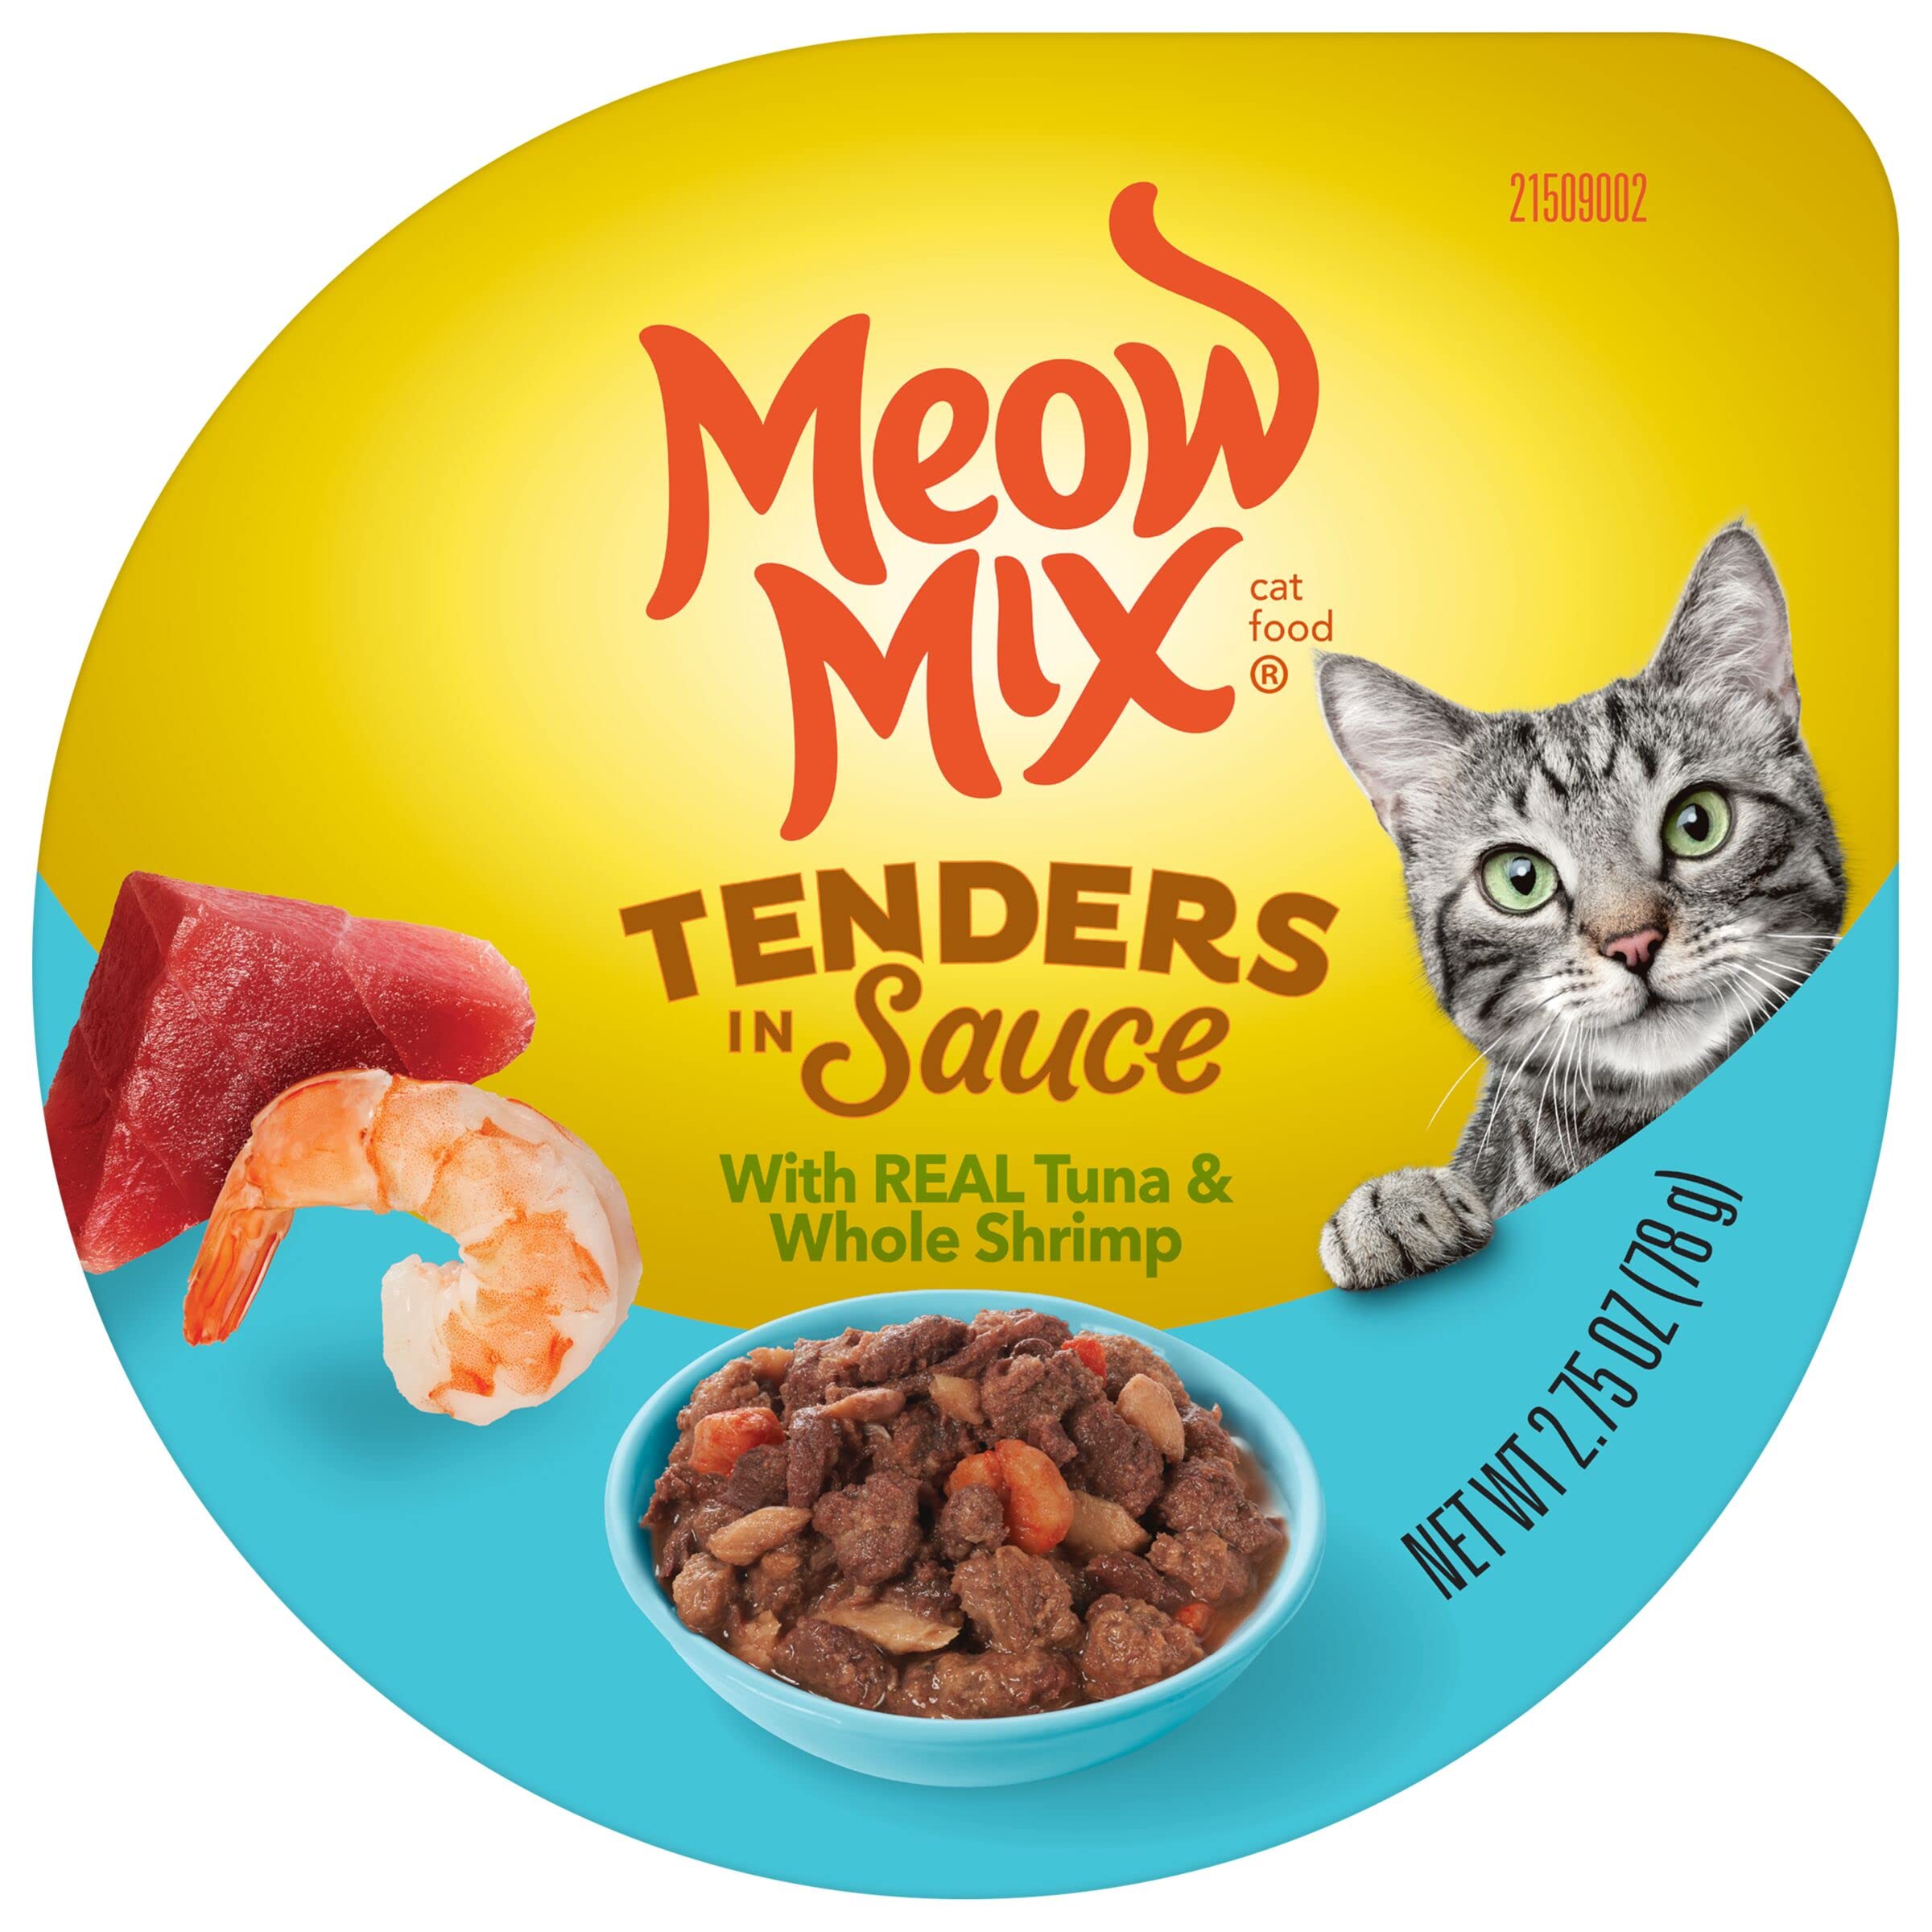 12-Pack 2.75-Oz Meow Mix Tender in Sauce Wet Cat Food (Tuna & Shrimp) $2.90 w/ Autoship + Free S/H